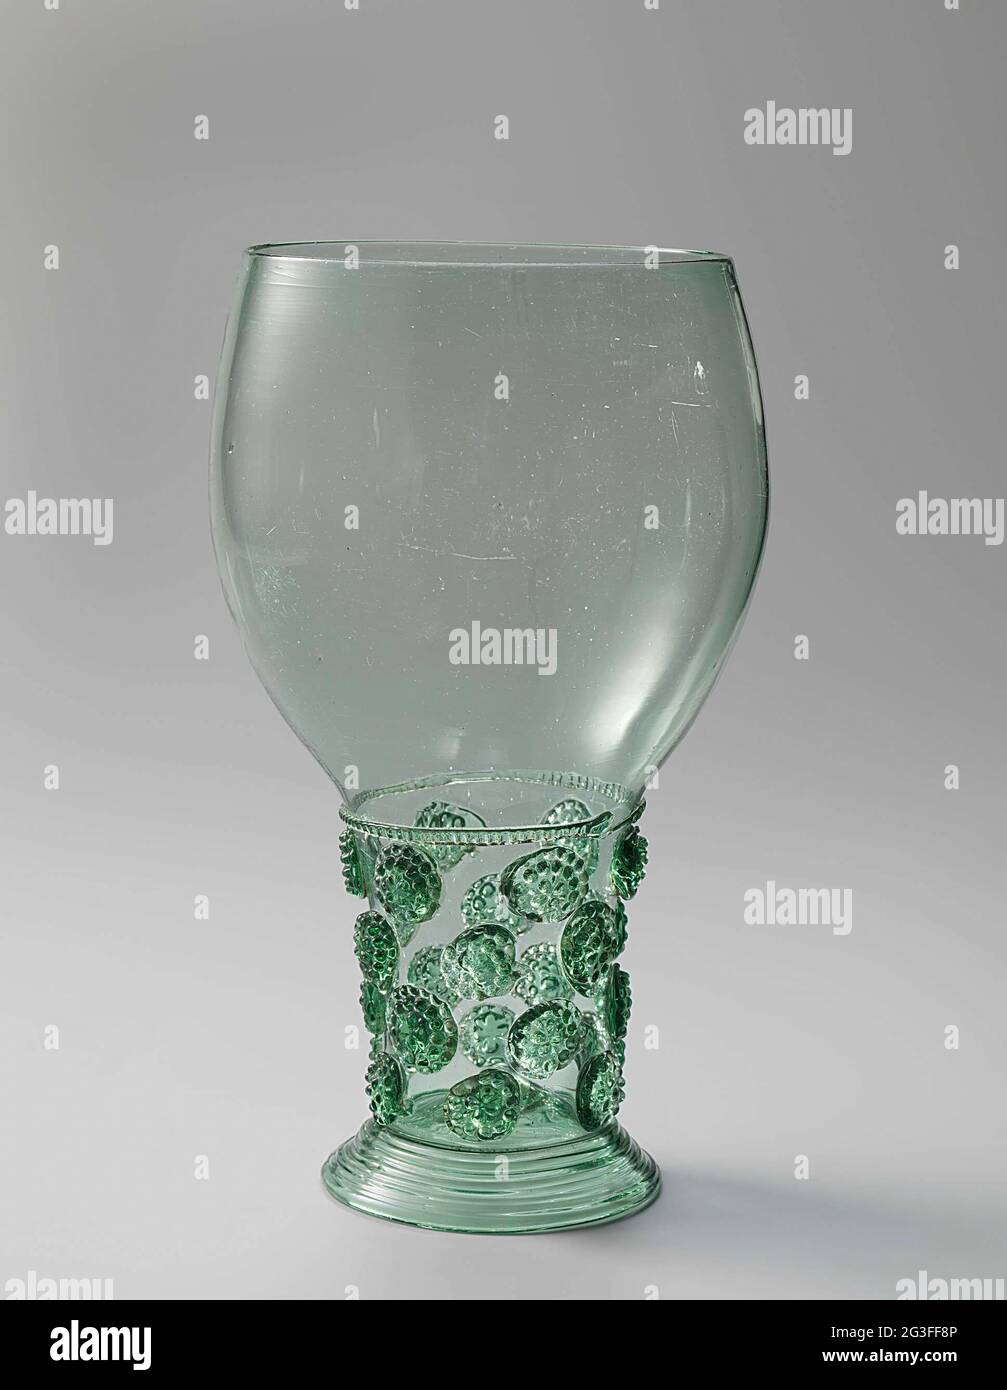 Sold at Auction: 6 Roemer German Green Ribbed Stem Wine Glasses